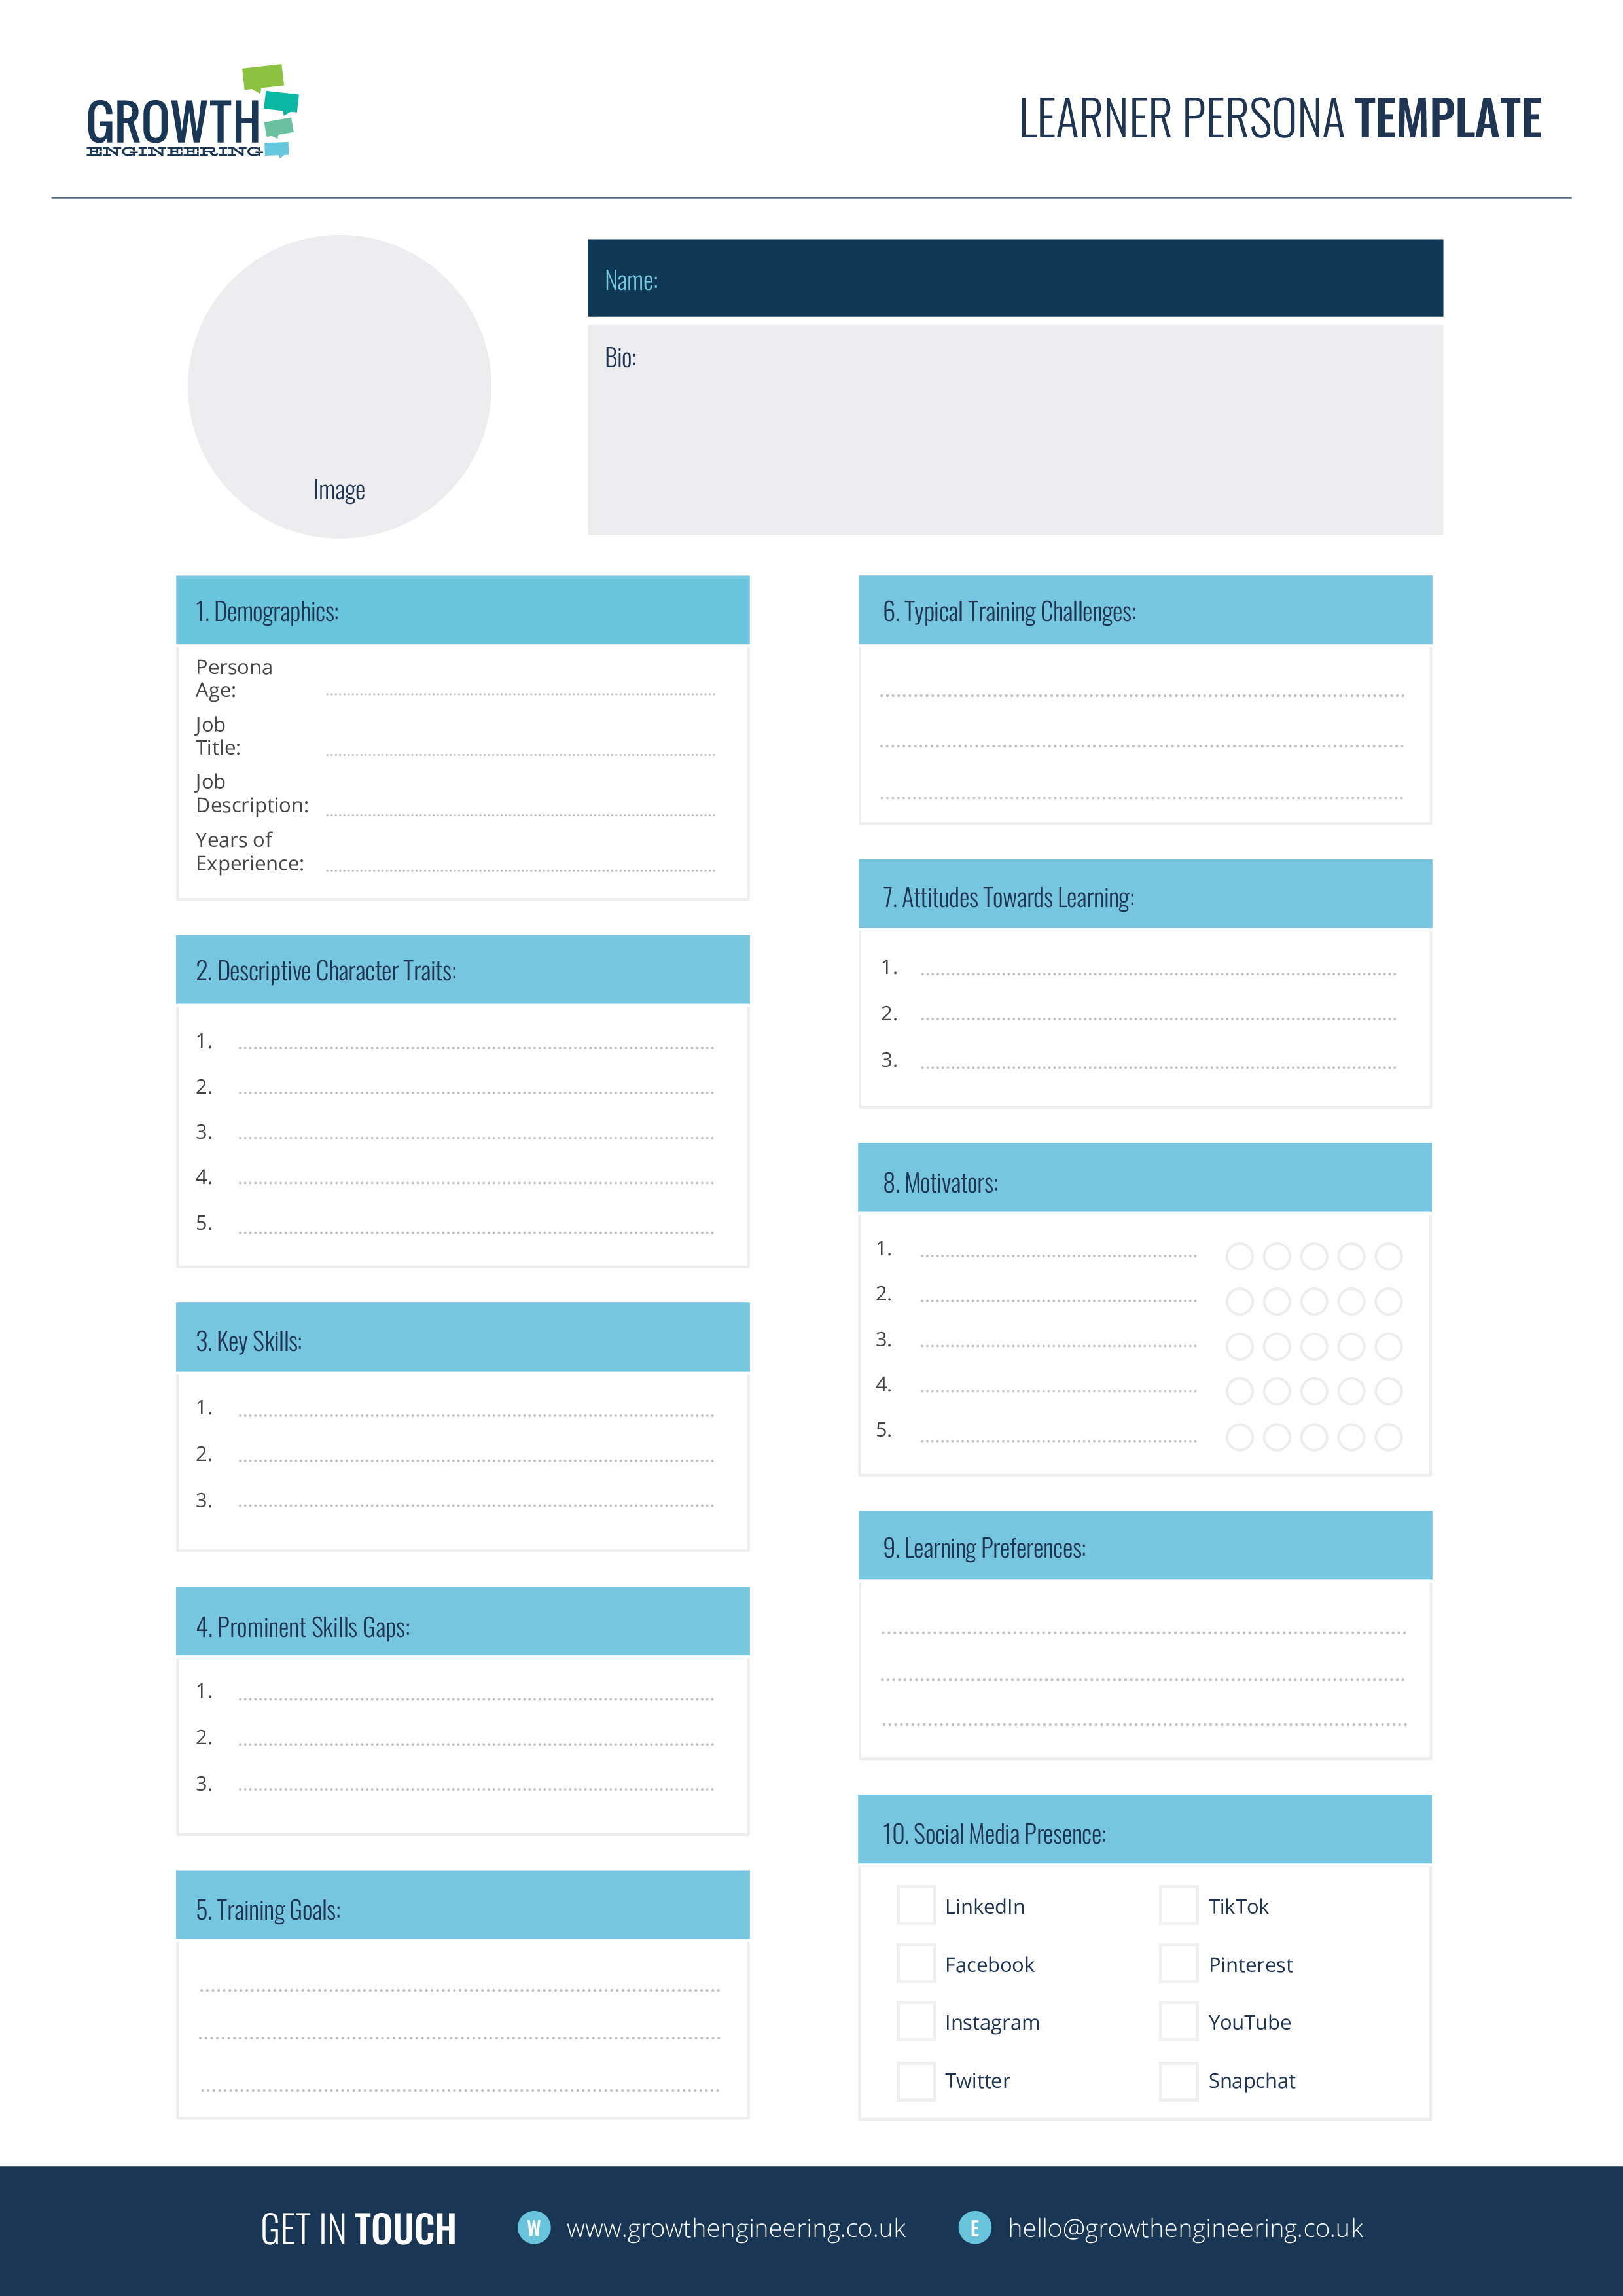 Learner persona creation template